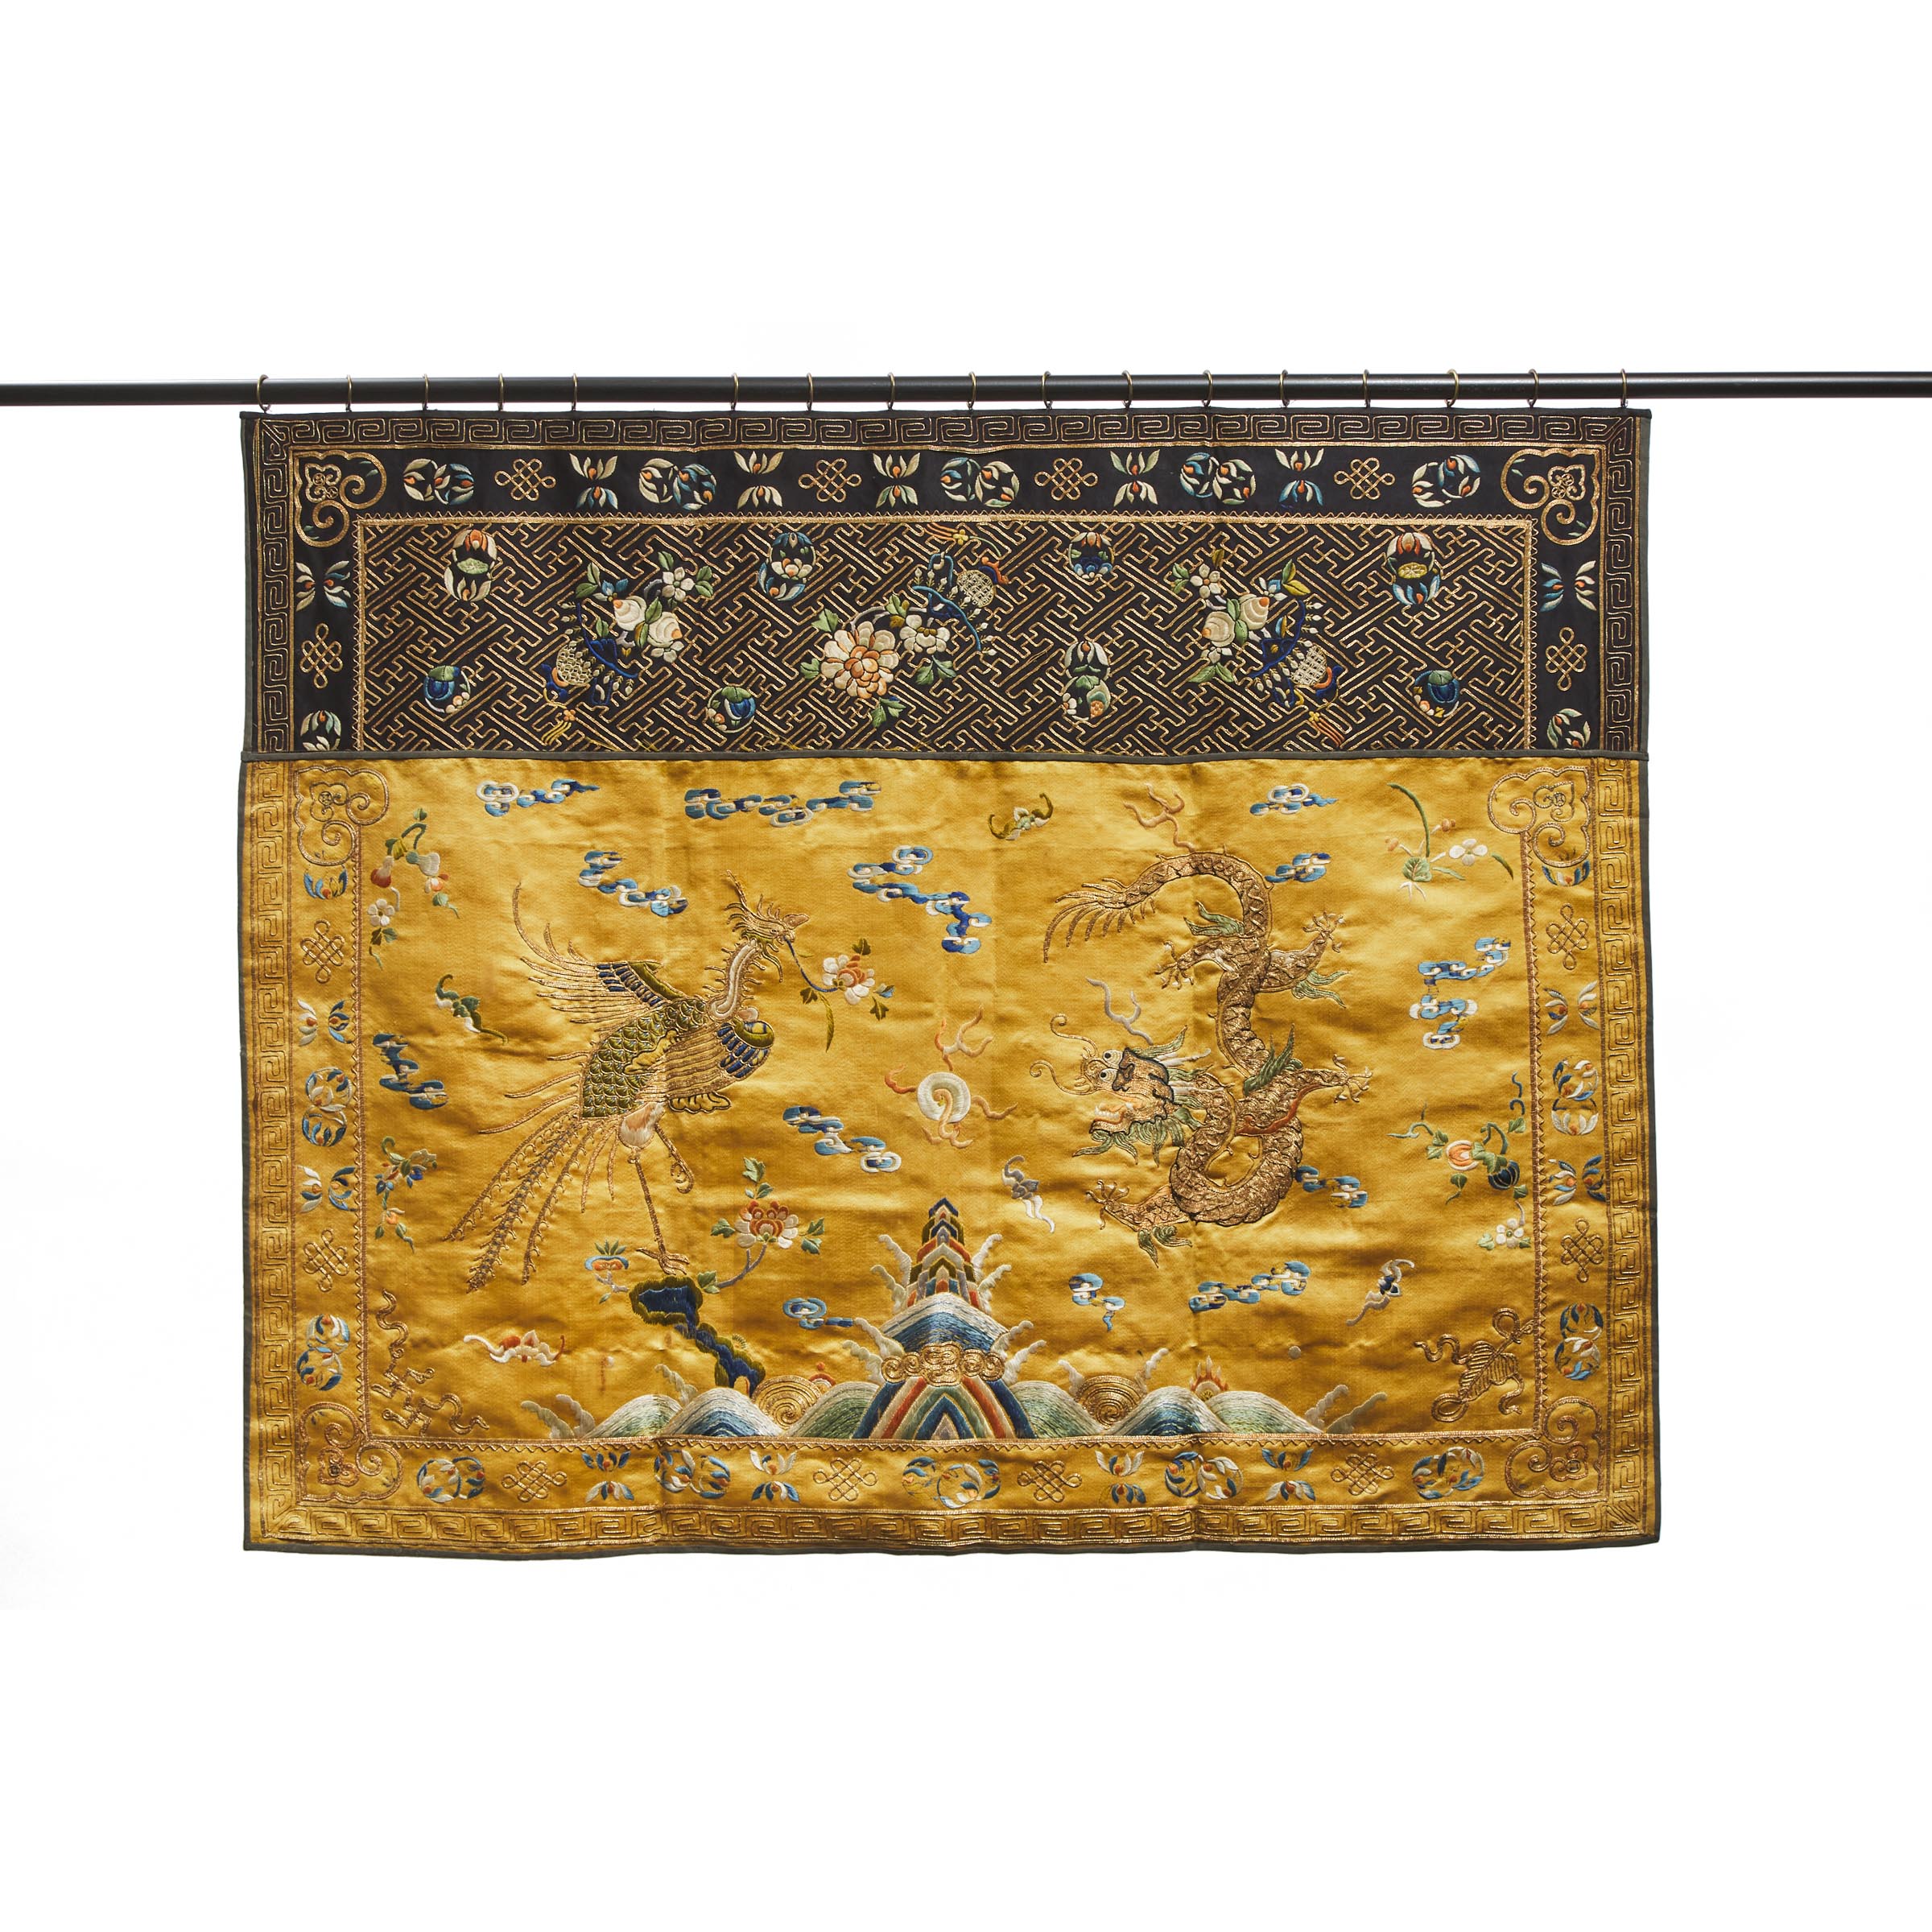 A Yellow-Ground Embroidered 'Dragon and Phoenix' Panel, Qing Dynasty, Early 19th Century